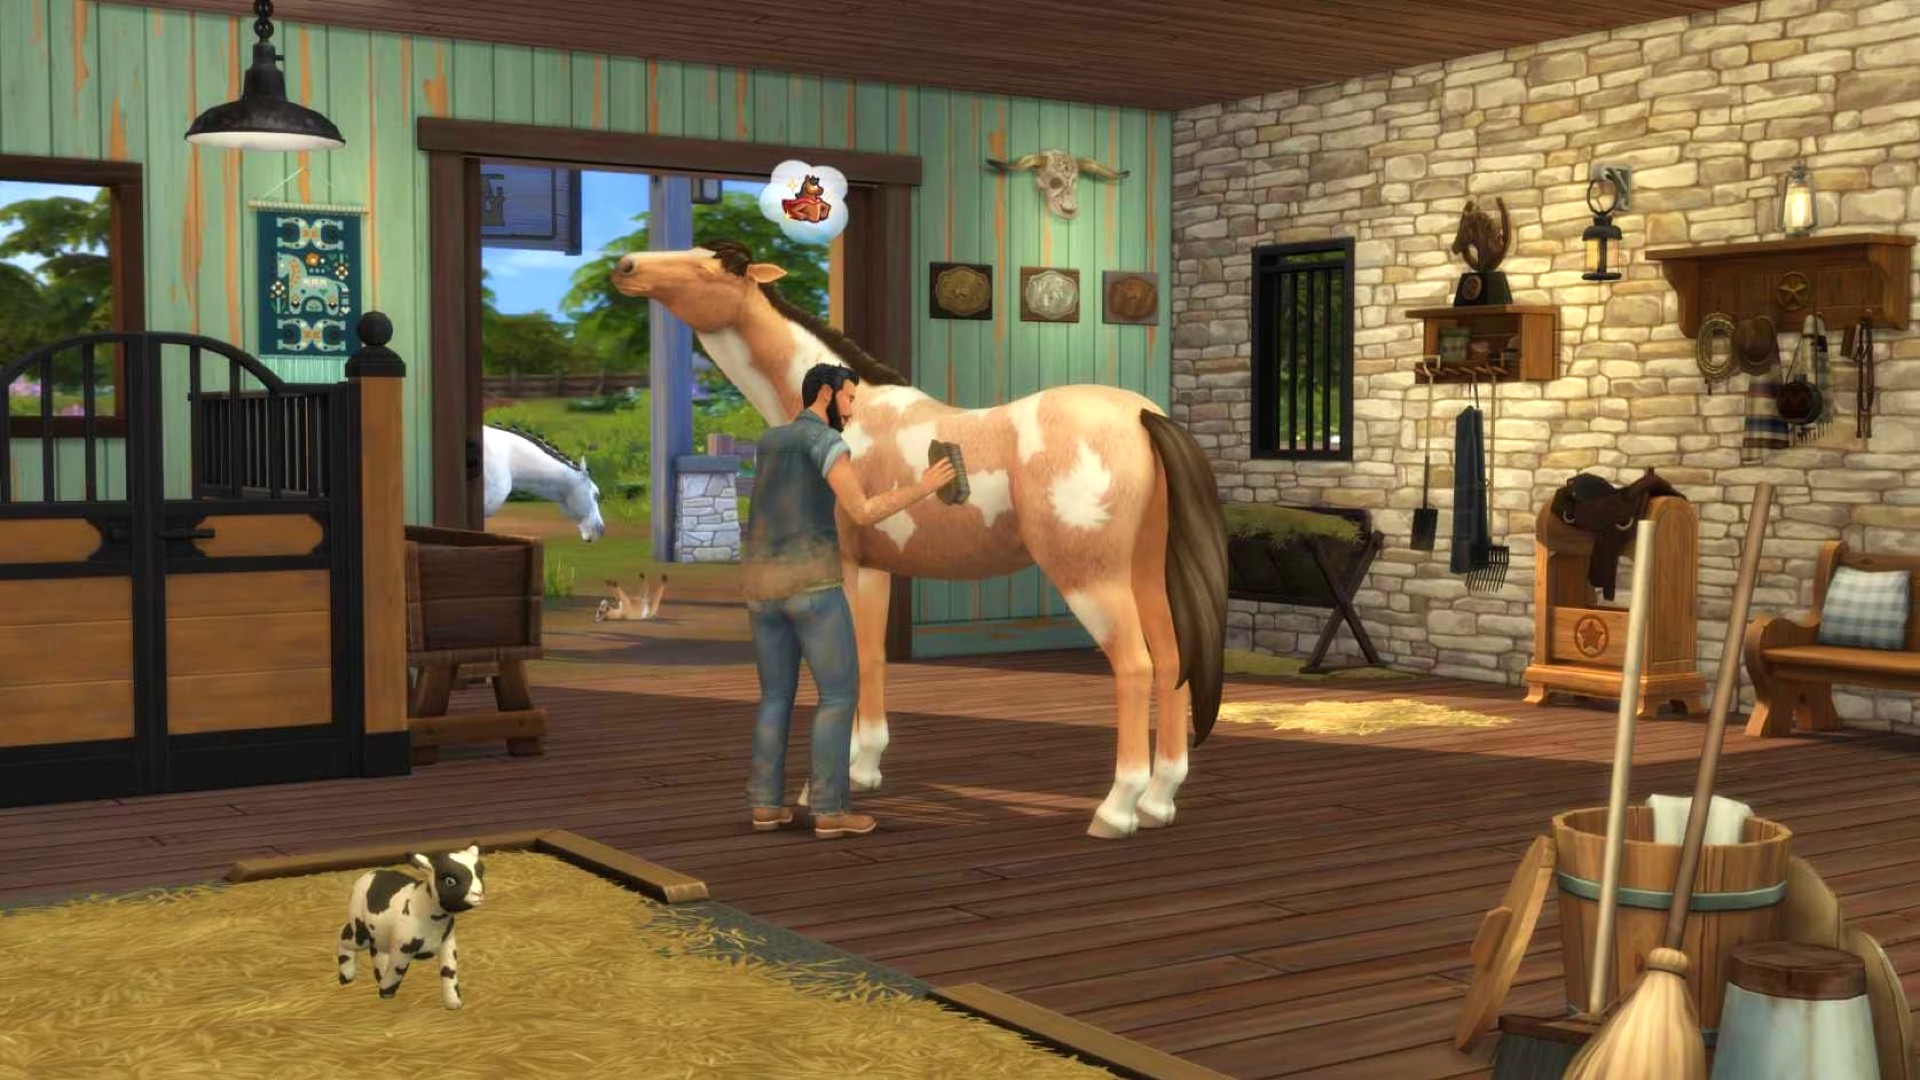 The Sims 4 cheats: every cheat code for easy money, building, skills and  more